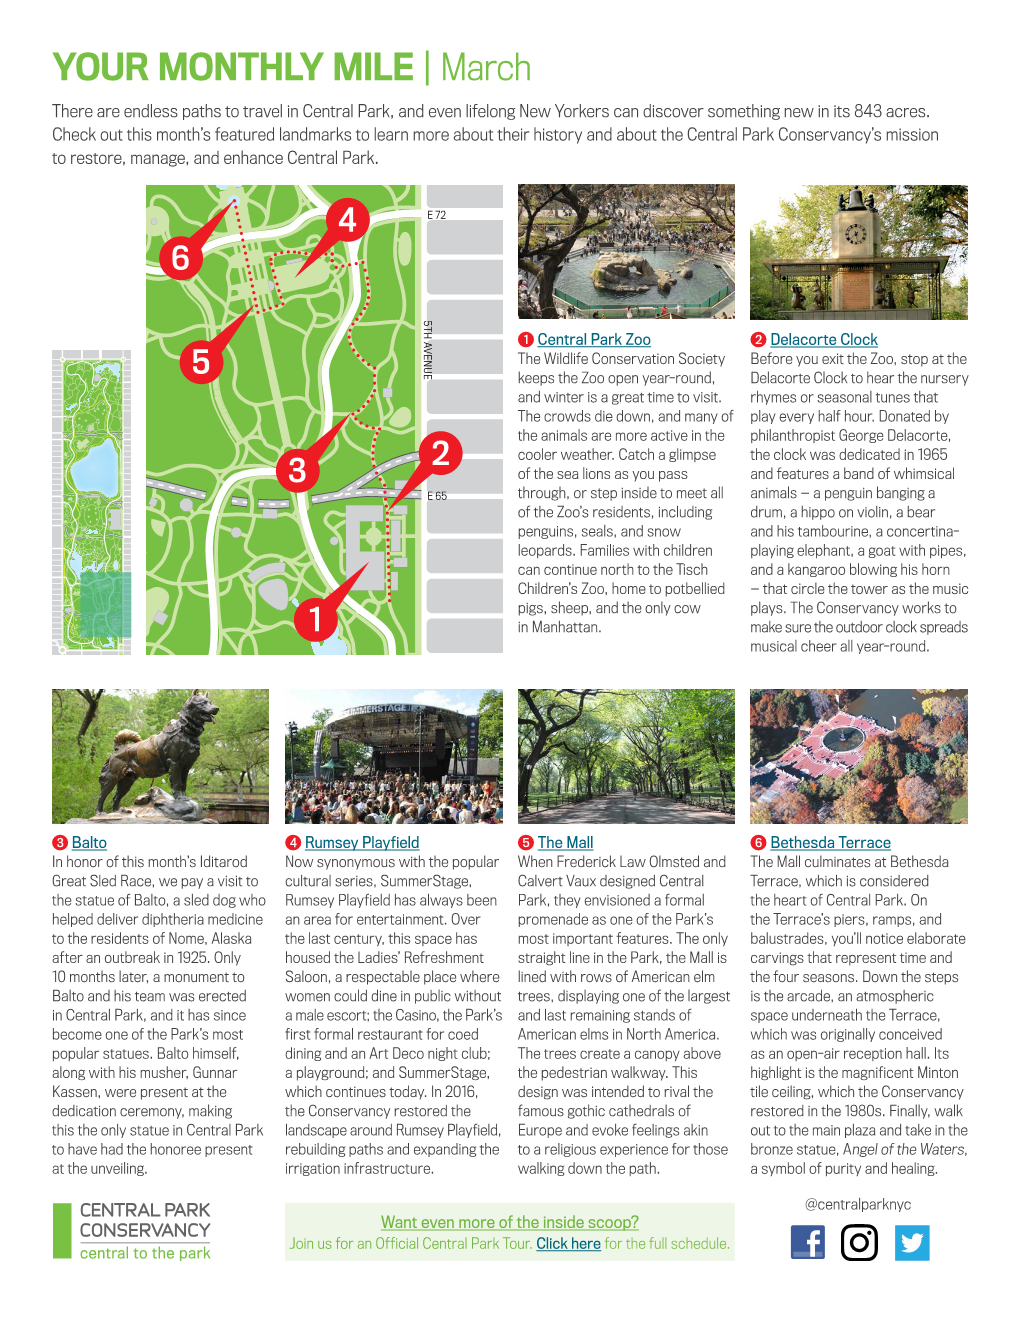 YOUR MONTHLY MILE | March There Are Endless Paths to Travel in Central Park, and Even Lifelong New Yorkers Can Discover Something New in Its 843 Acres